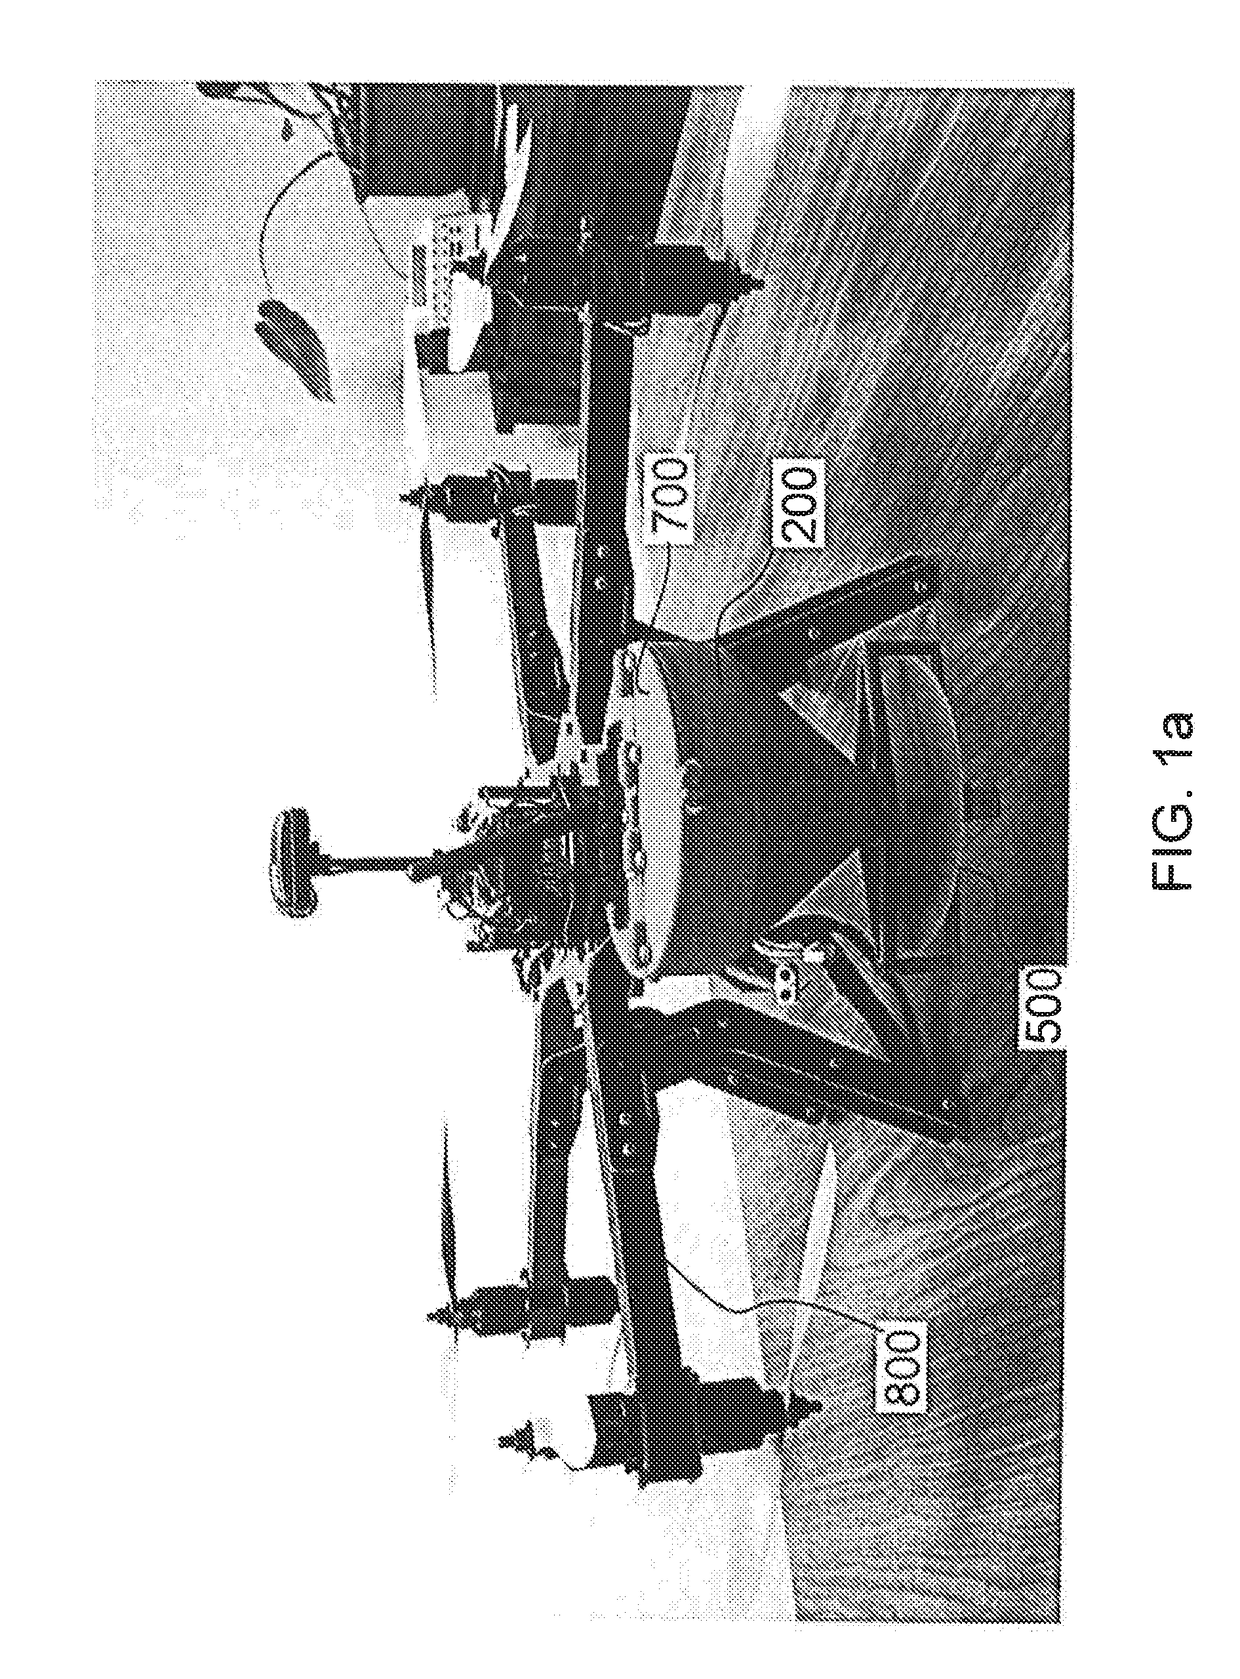 Method and Apparatus Used for Biological Control of Agricultural Pests